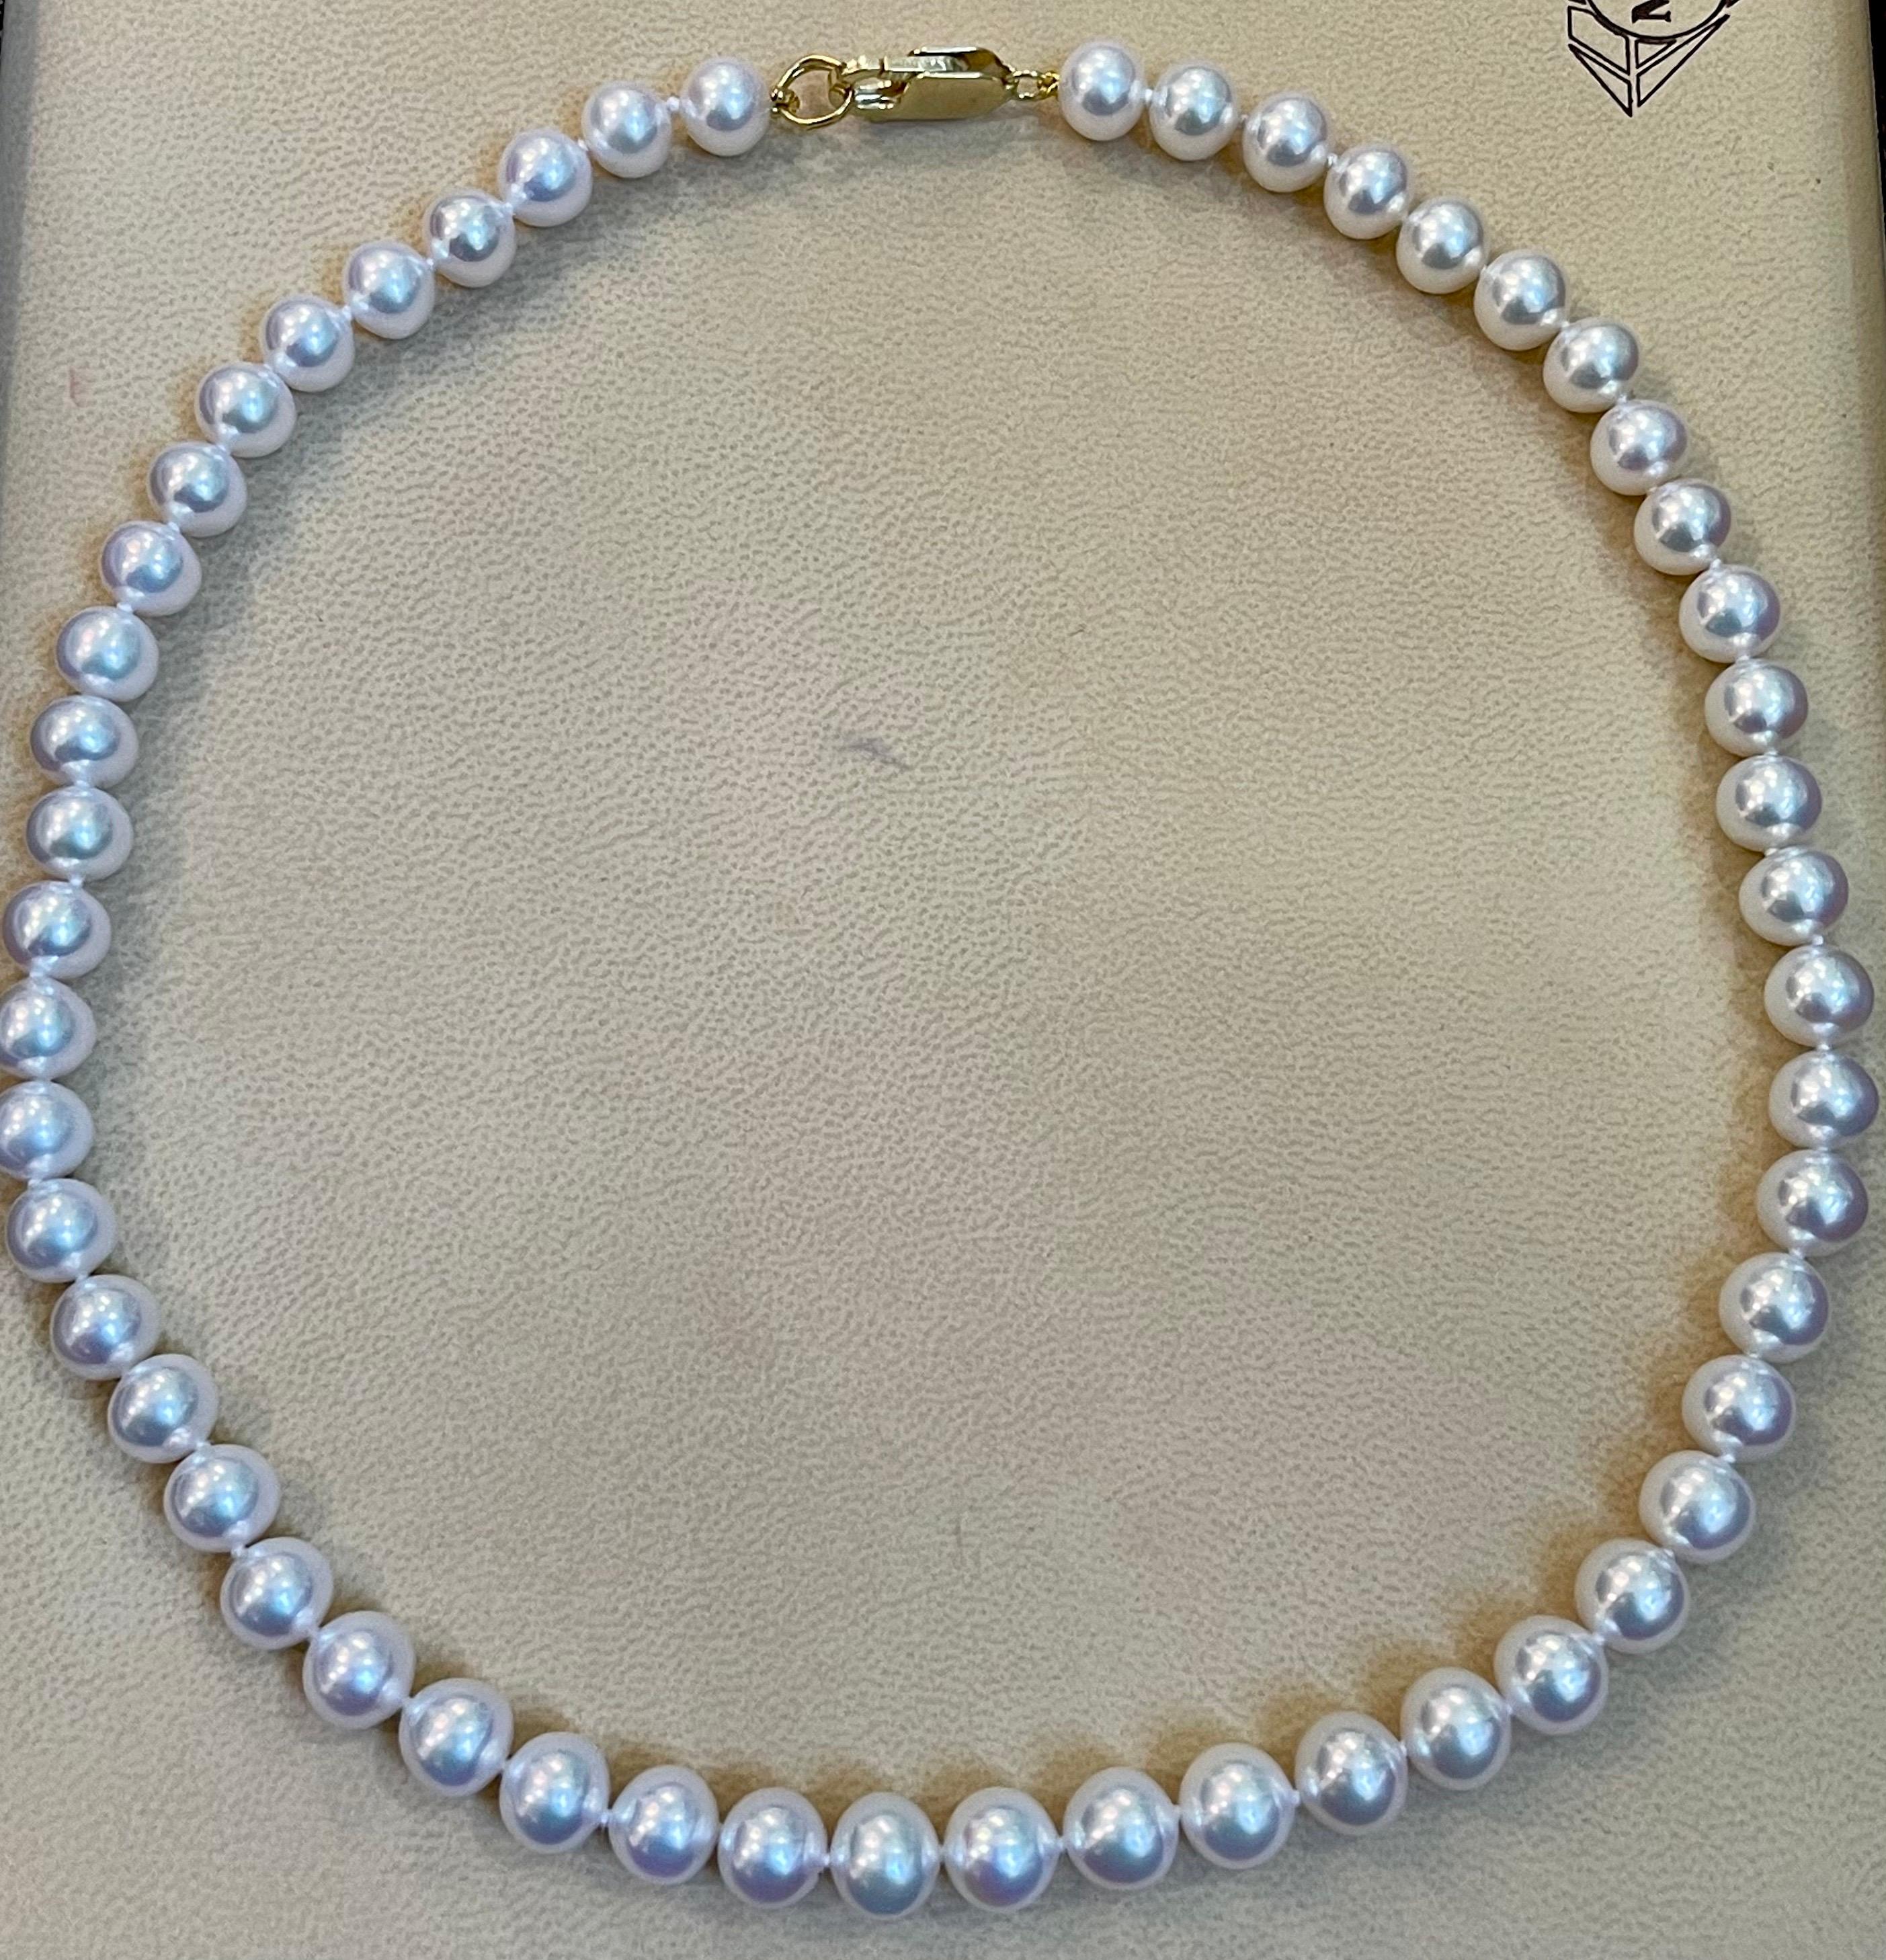 50 Round Akoya Pearls Strand Necklace Set in 14 Karat Gold Clasp For Sale 3